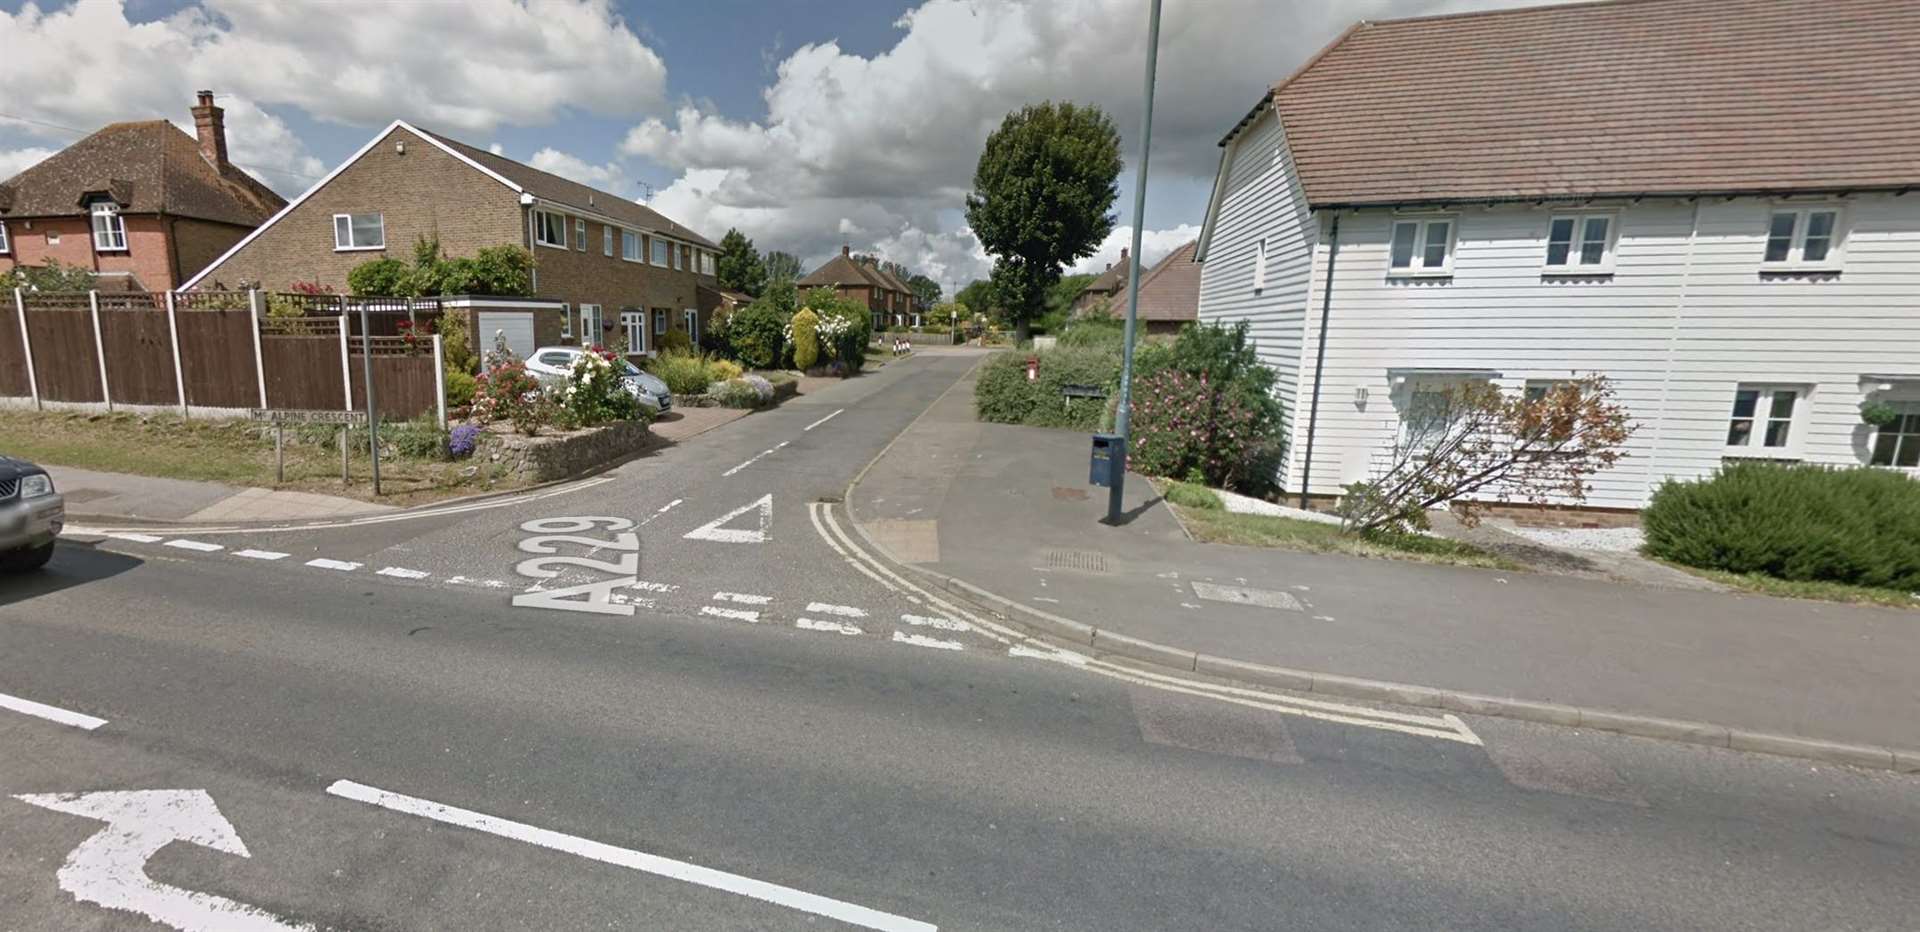 It happened near McAlpine Crescent in Loose. Picture: Google Street View